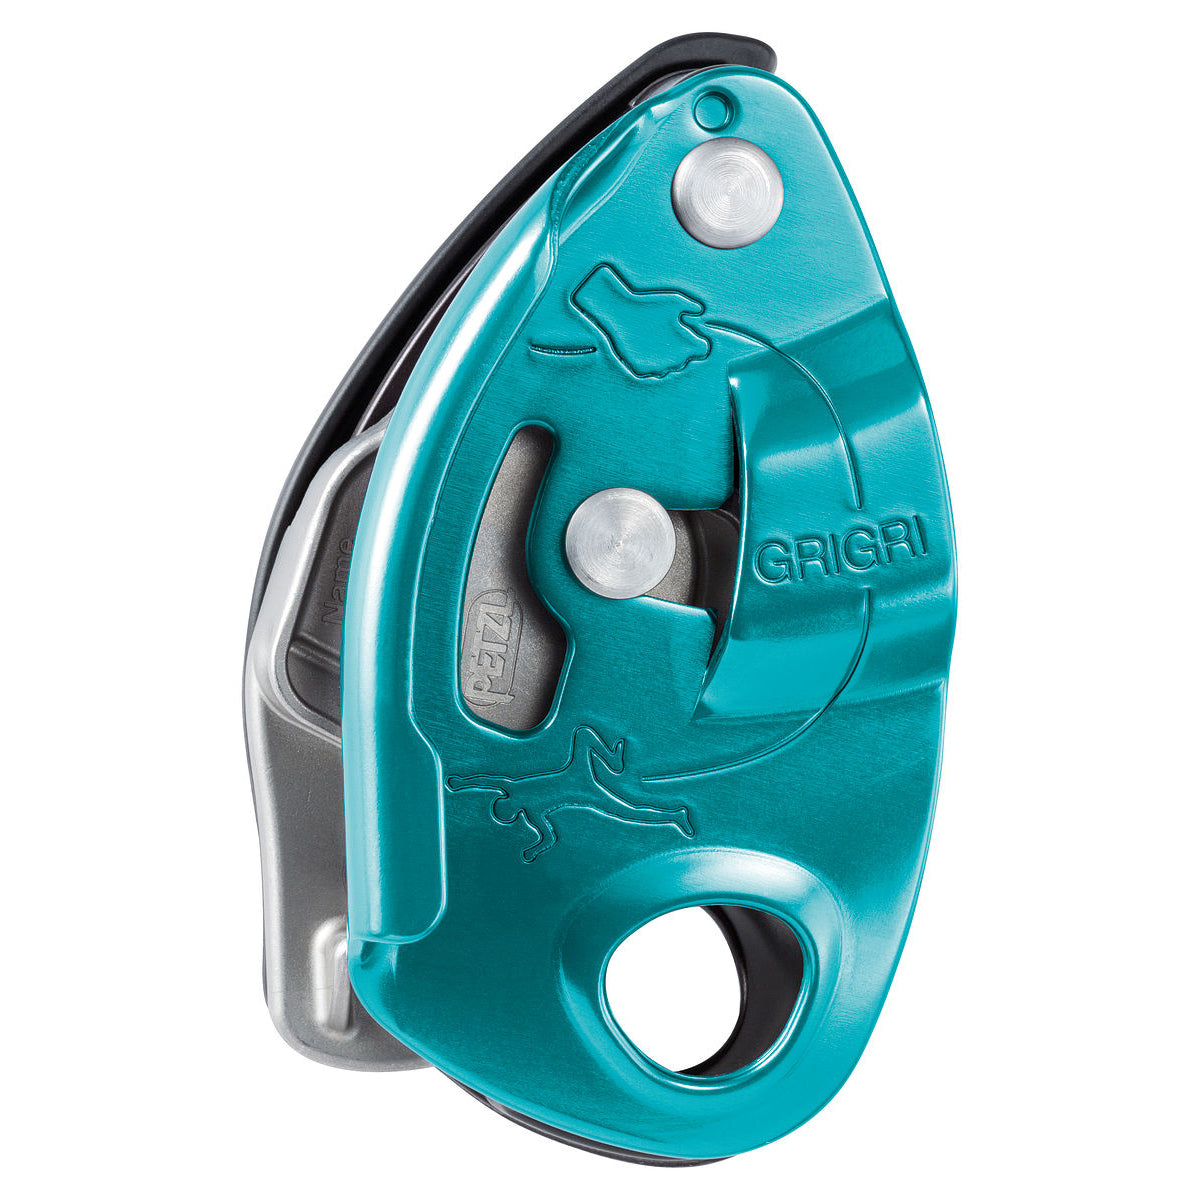 The petzl grigri, in green